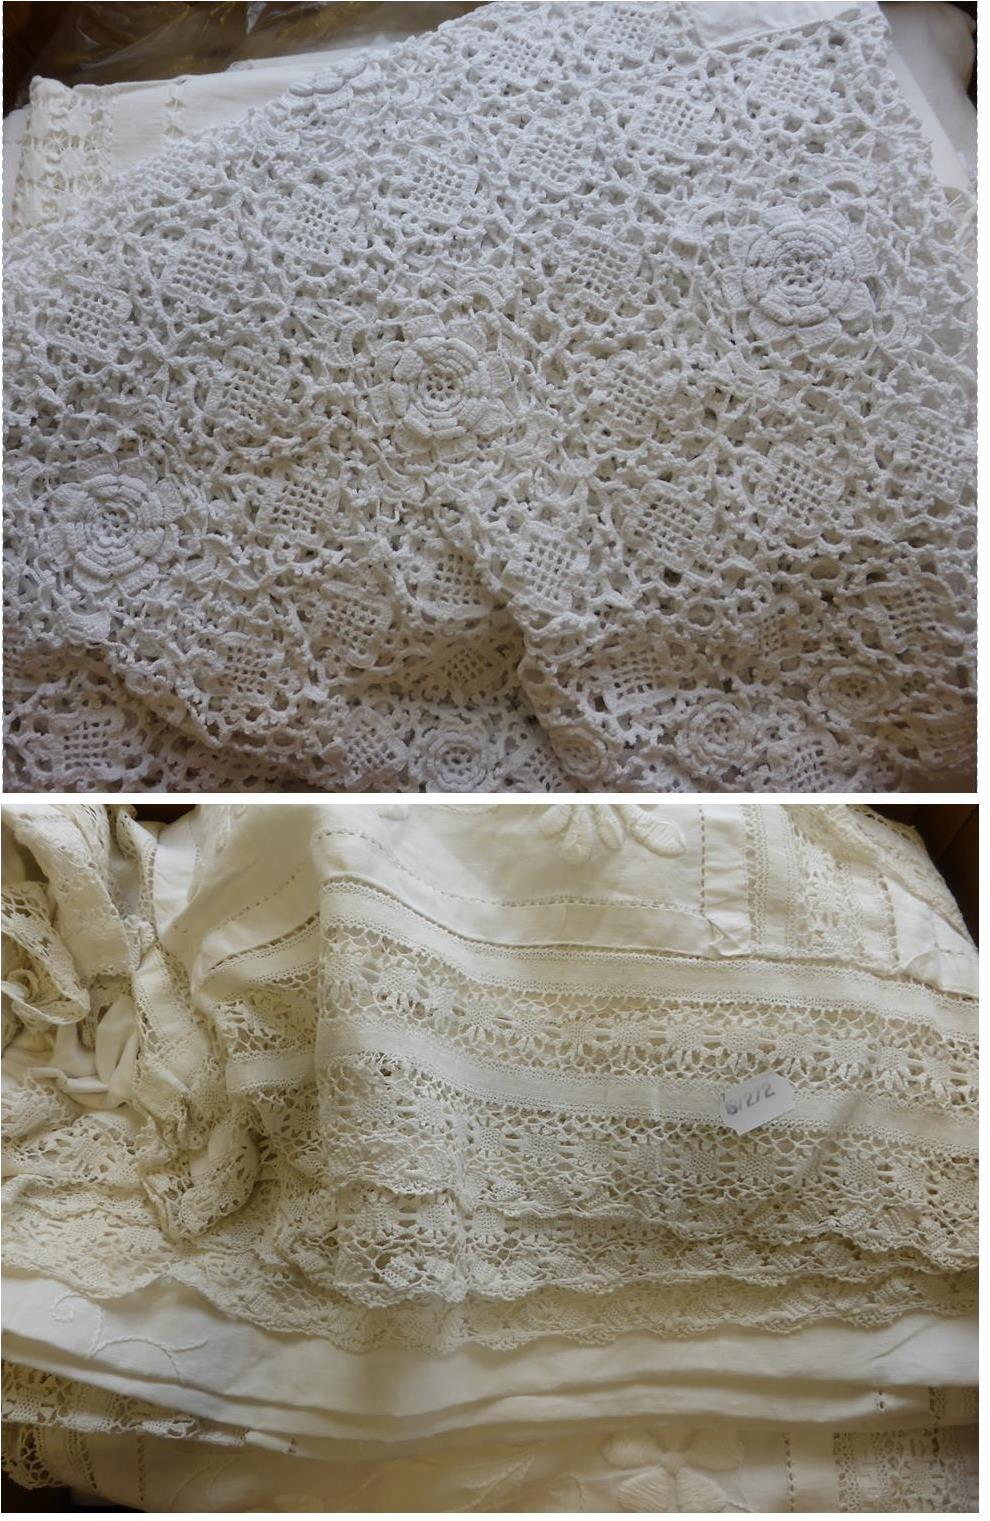 Assorted White Linen Sheets, cloths, embroidered and crochet textiles etc (two boxes)